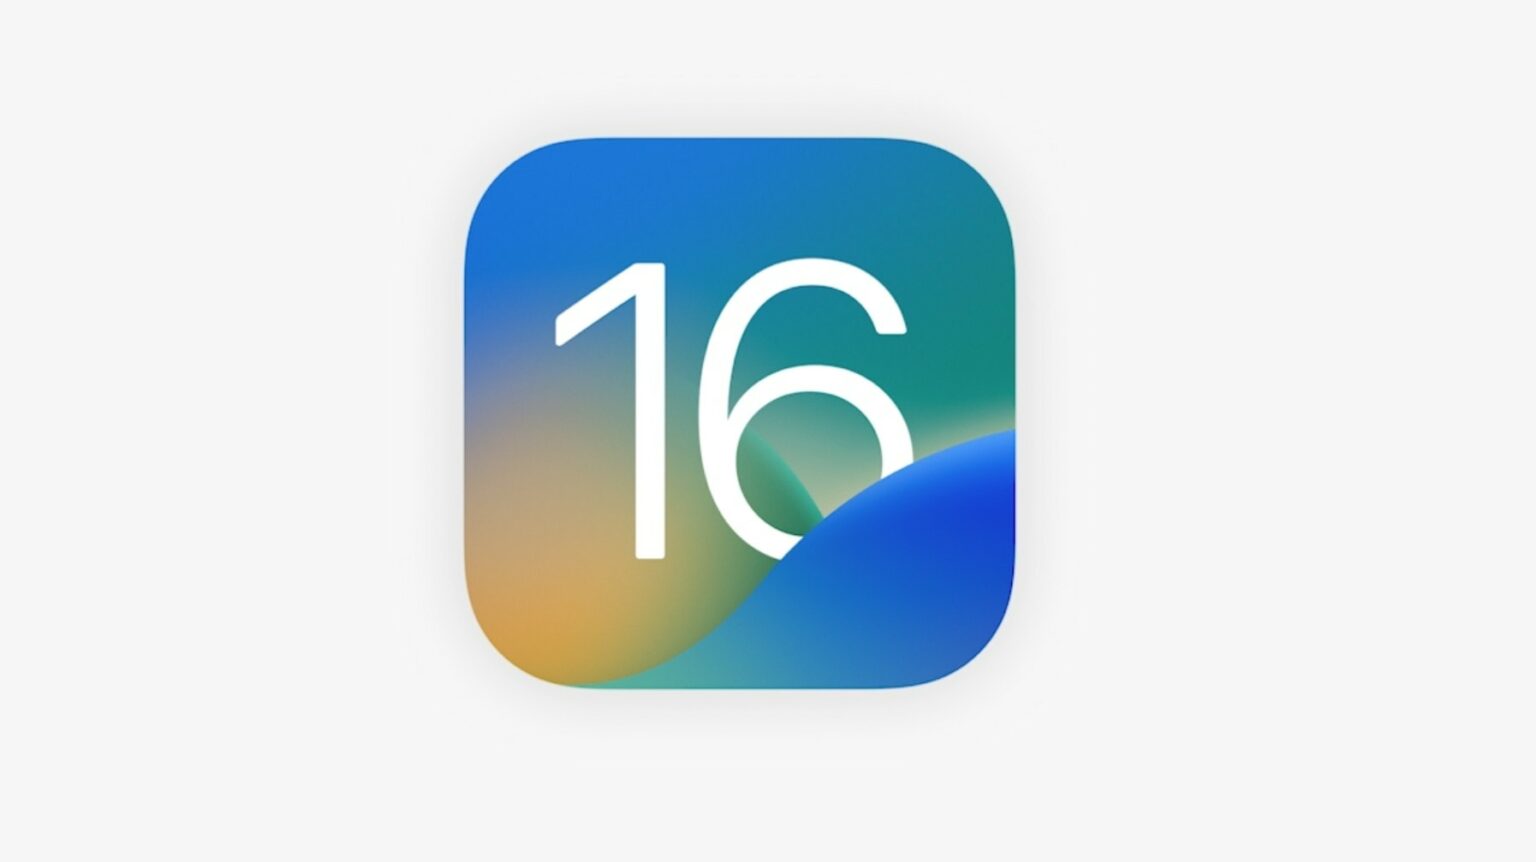 Apple makes a multitude of changes with iOS 16.